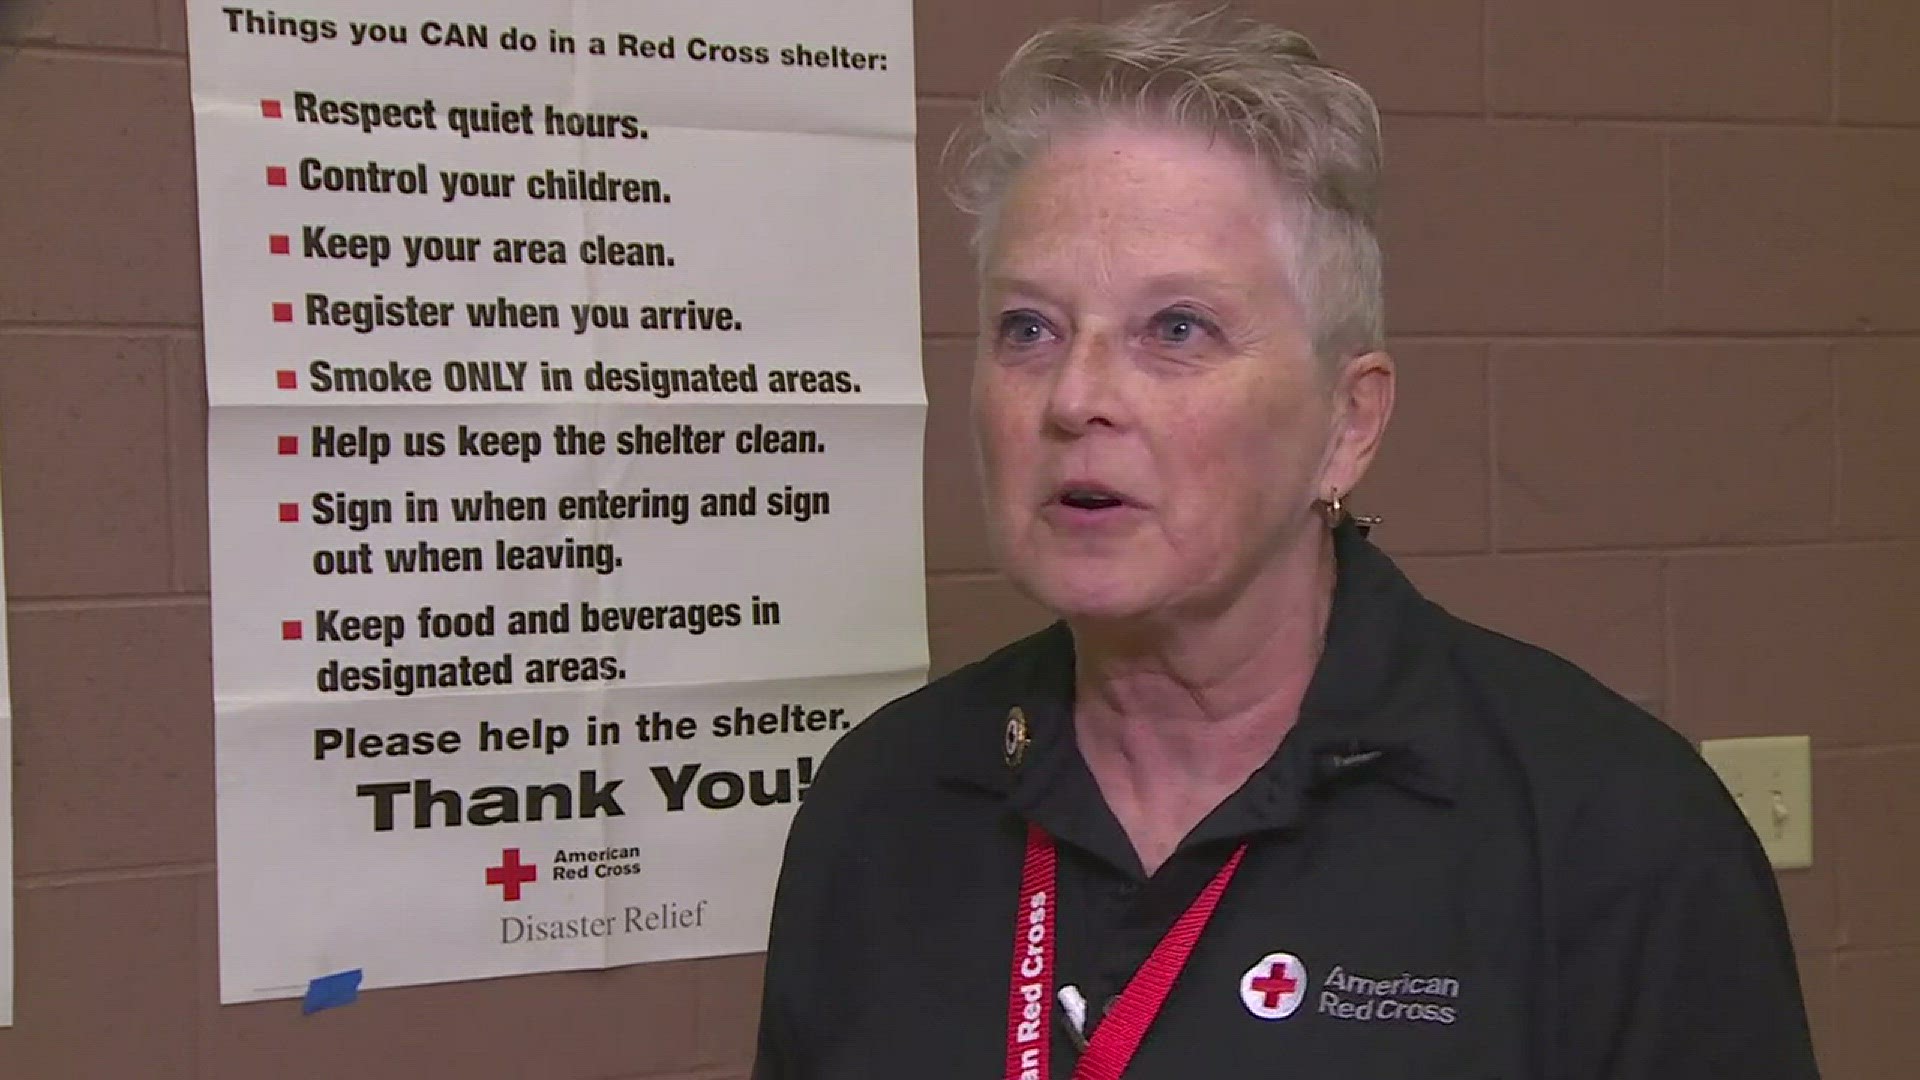 It will warm your heart! Red Cross workers came together to throw a party and cut a cake for two people celebrating birthdays at an evacuation shelter.